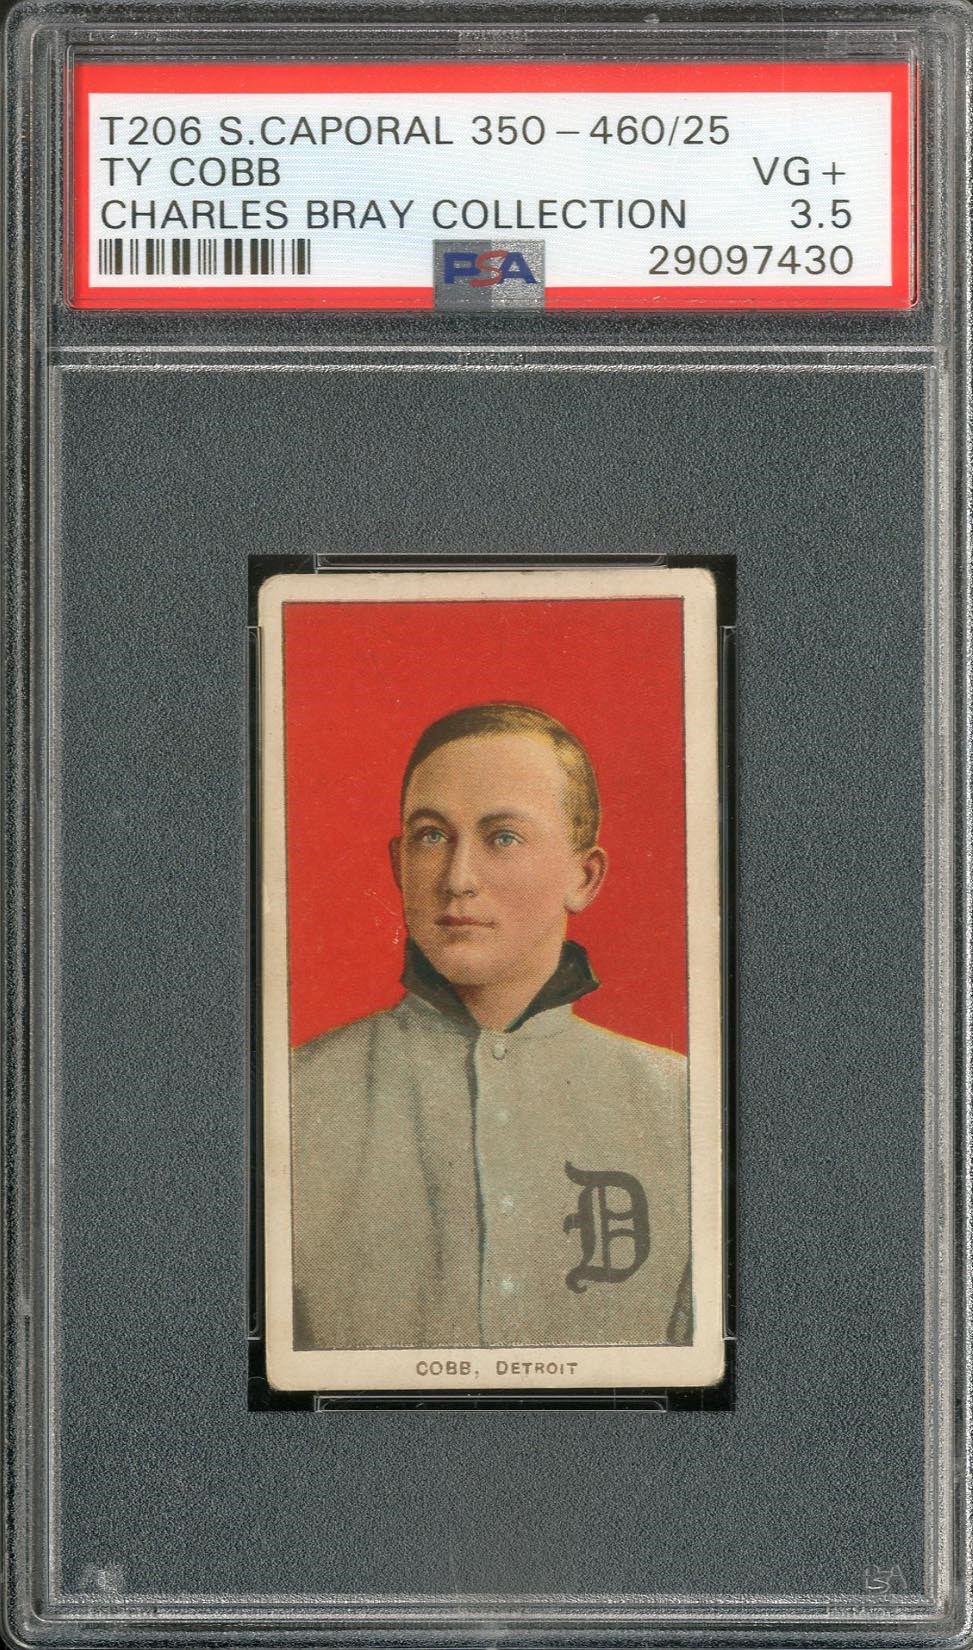 Baseball and Trading Cards - T206 Ty Cobb Red Portrait PSA VG+ 3.5 with Tougher Reverse - The Charles Bray Collection